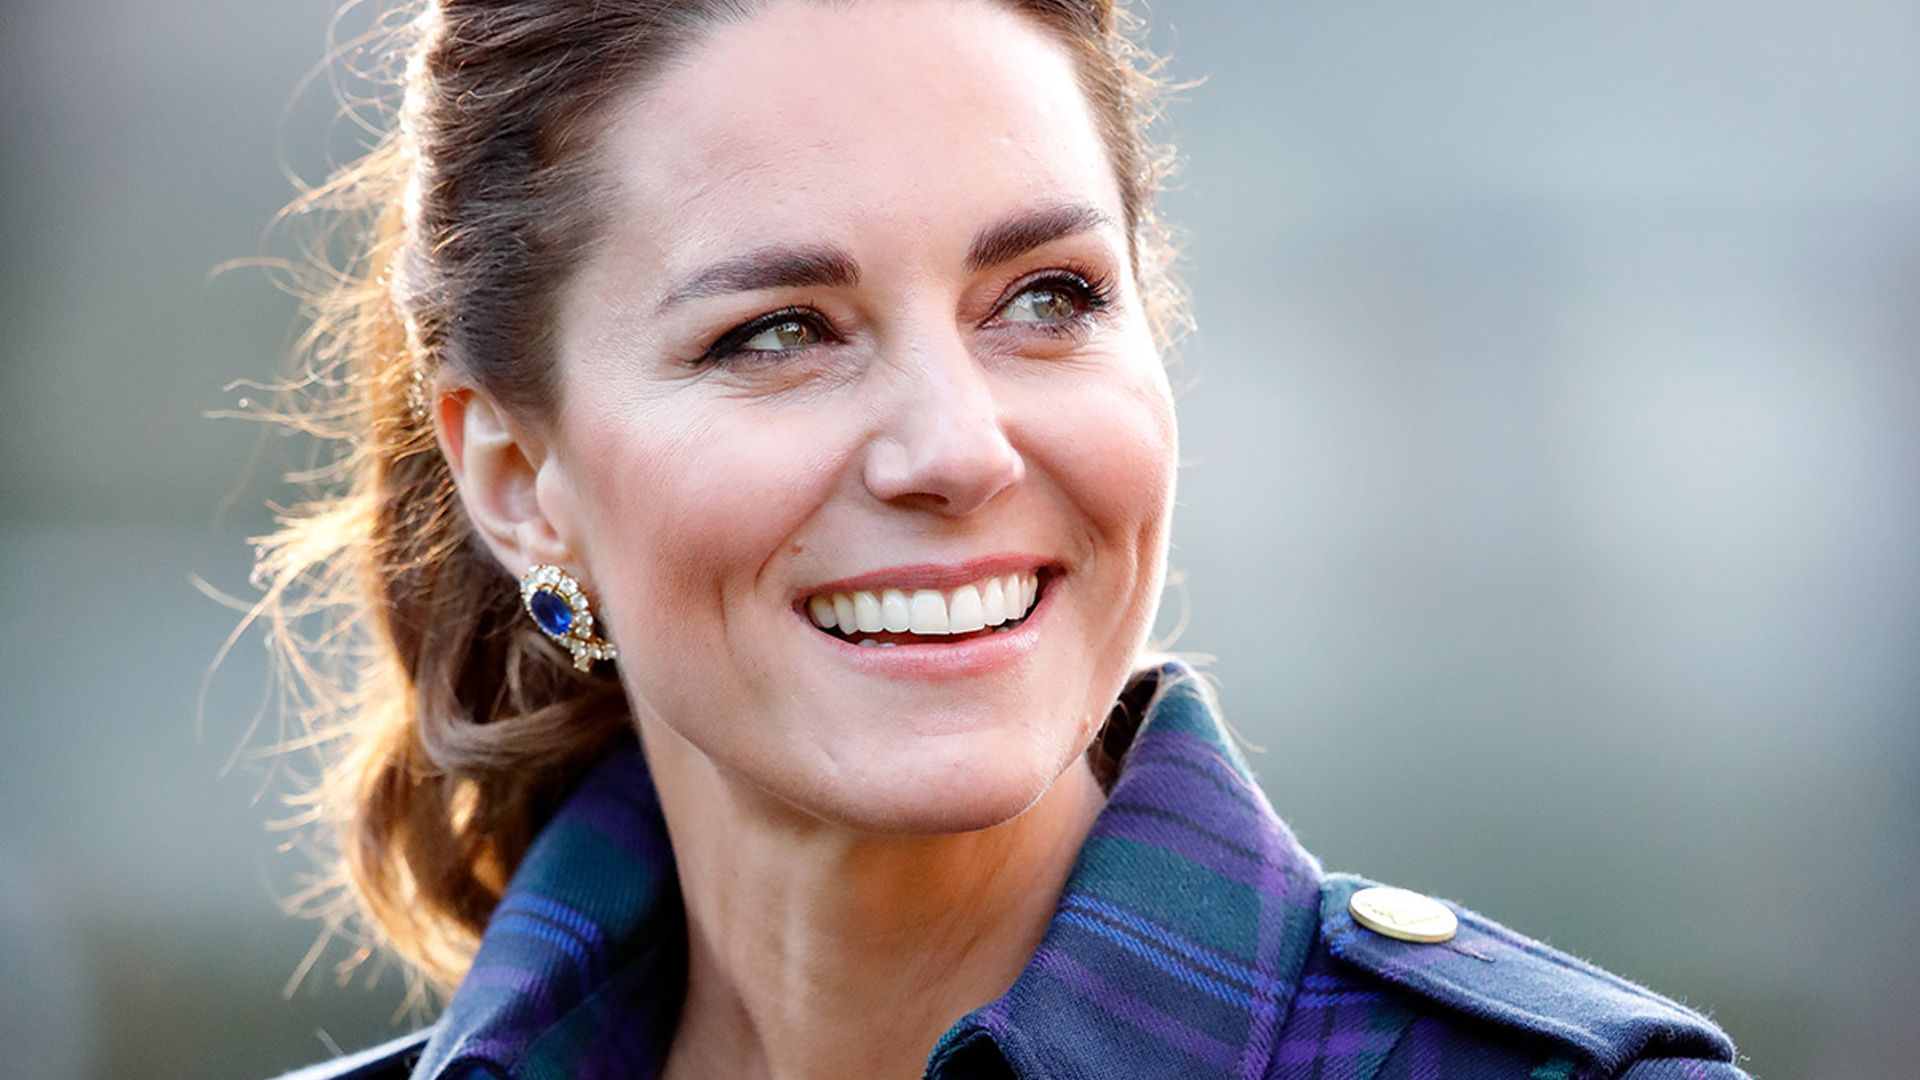 Kate Middleton's high street winter coat is back - and it's had the best makeover